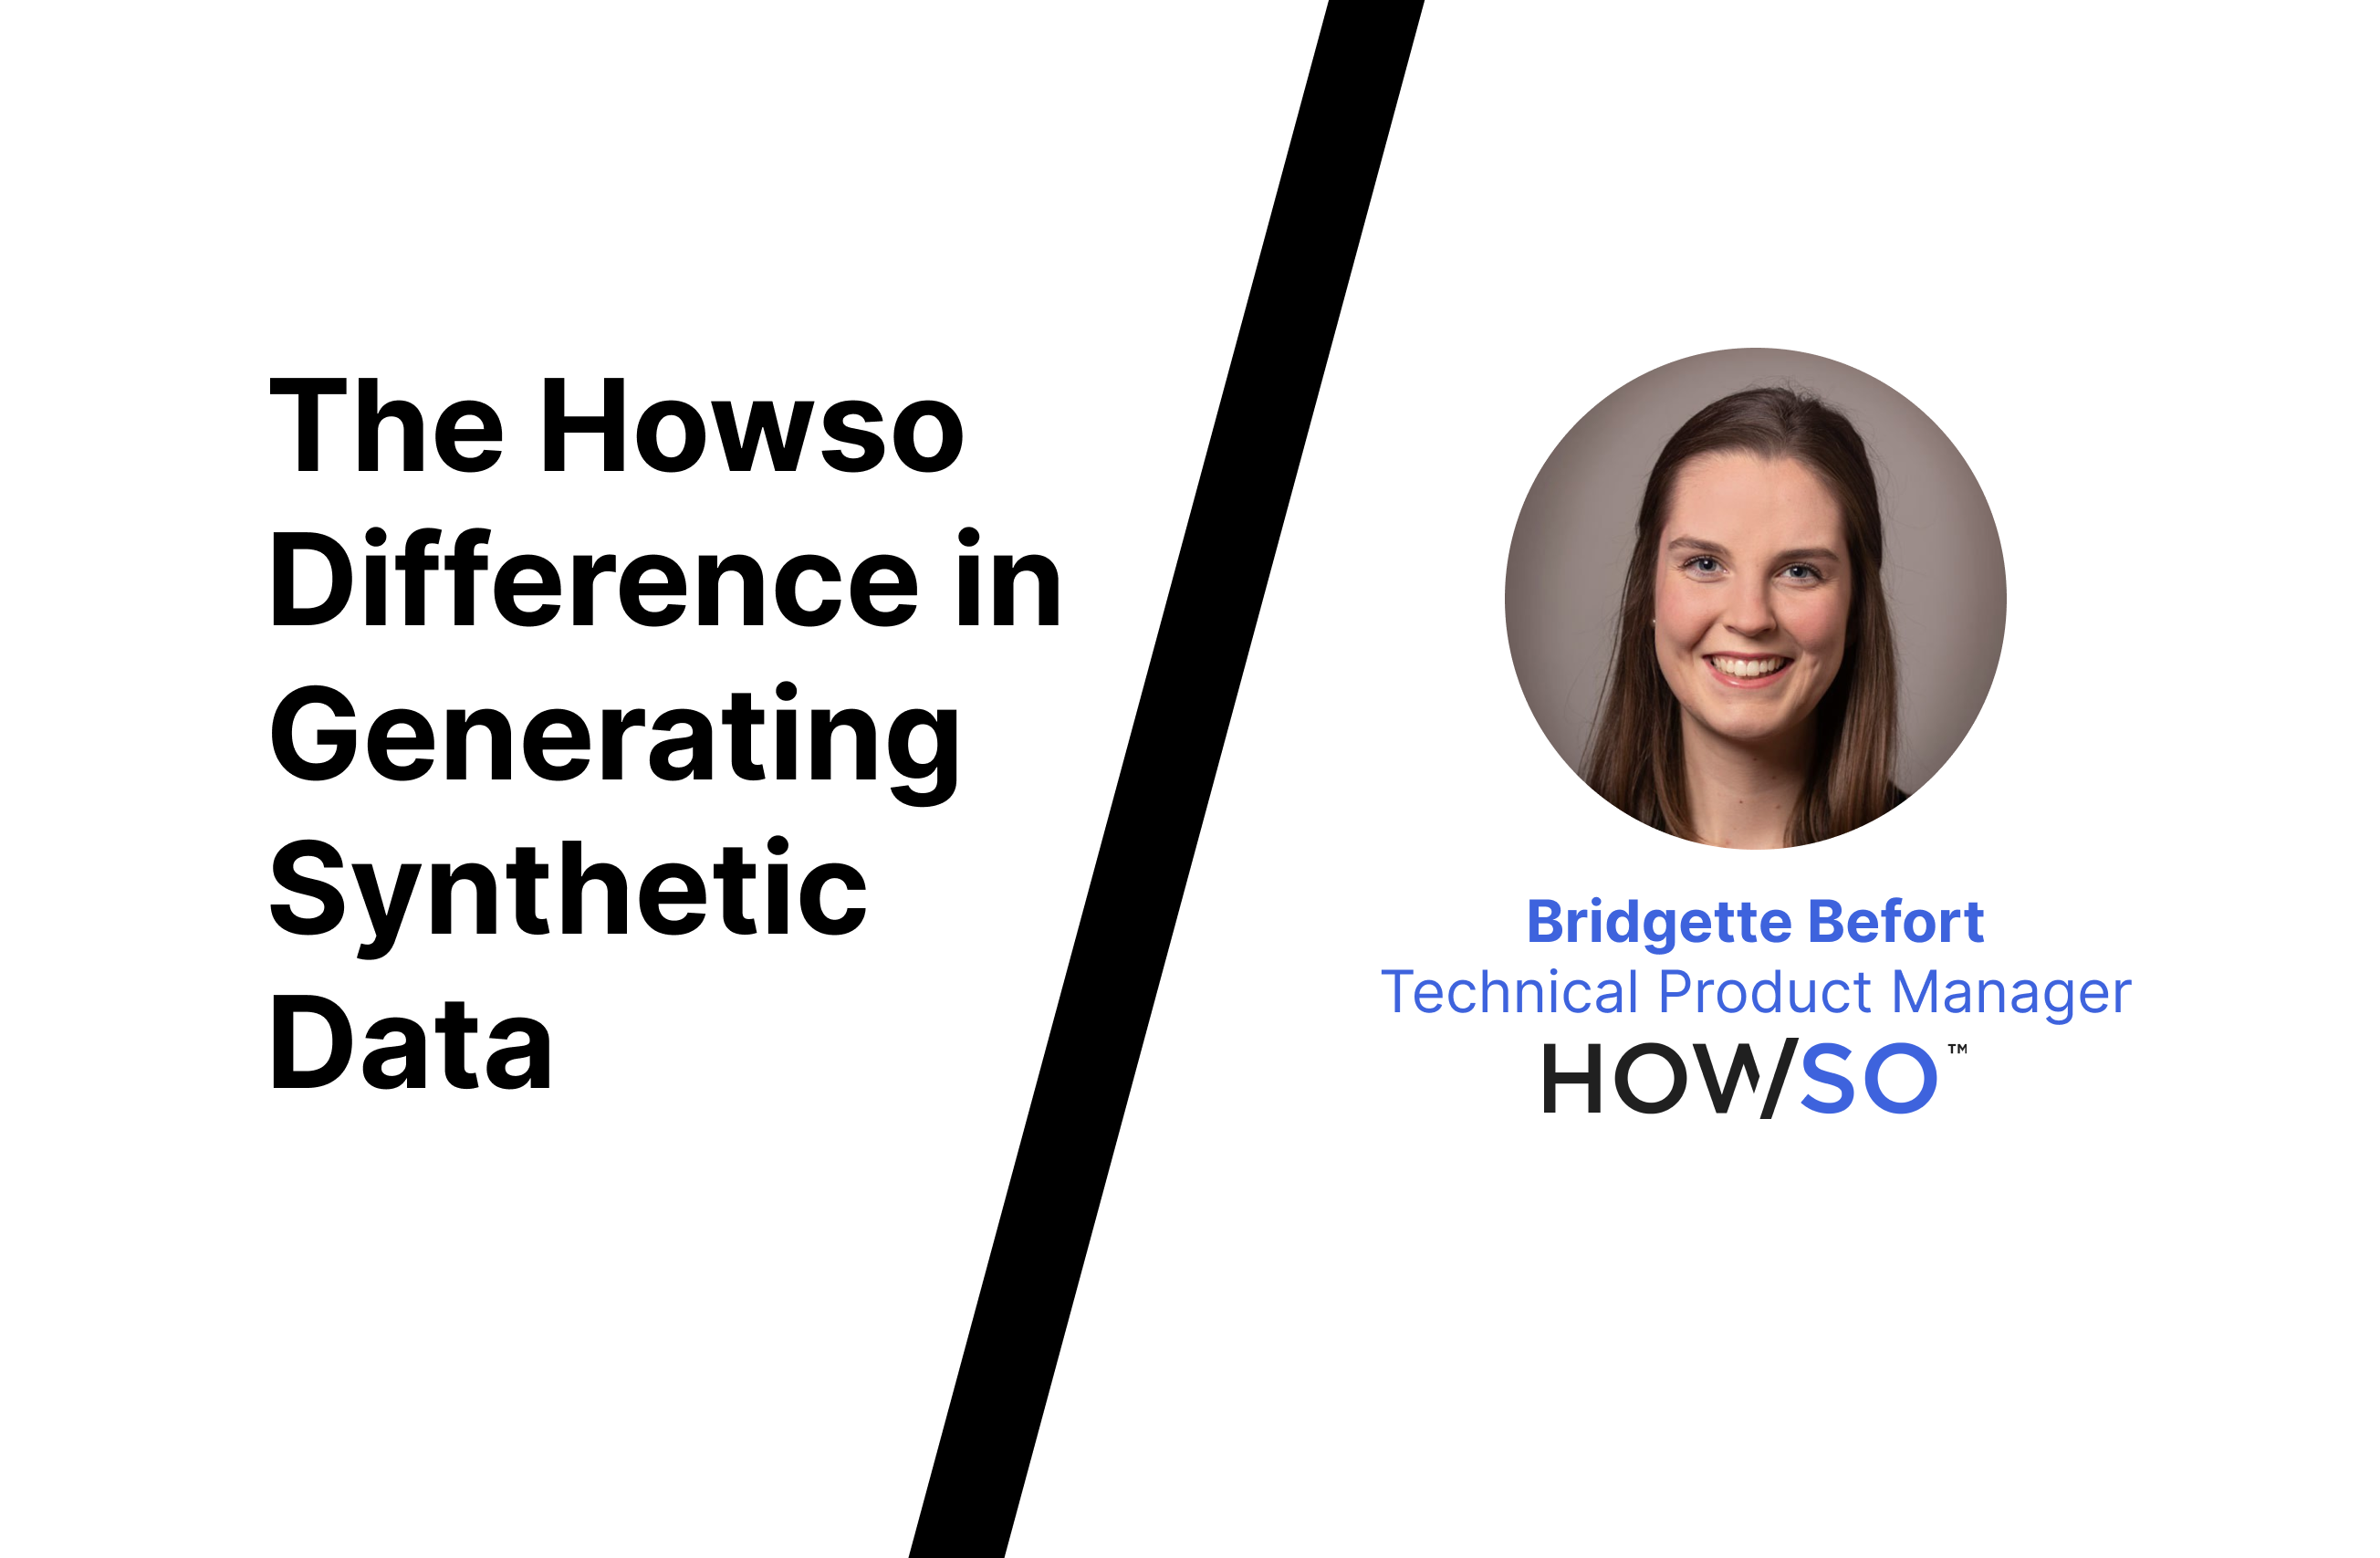 The Howso Difference in Generating Synthetic Data